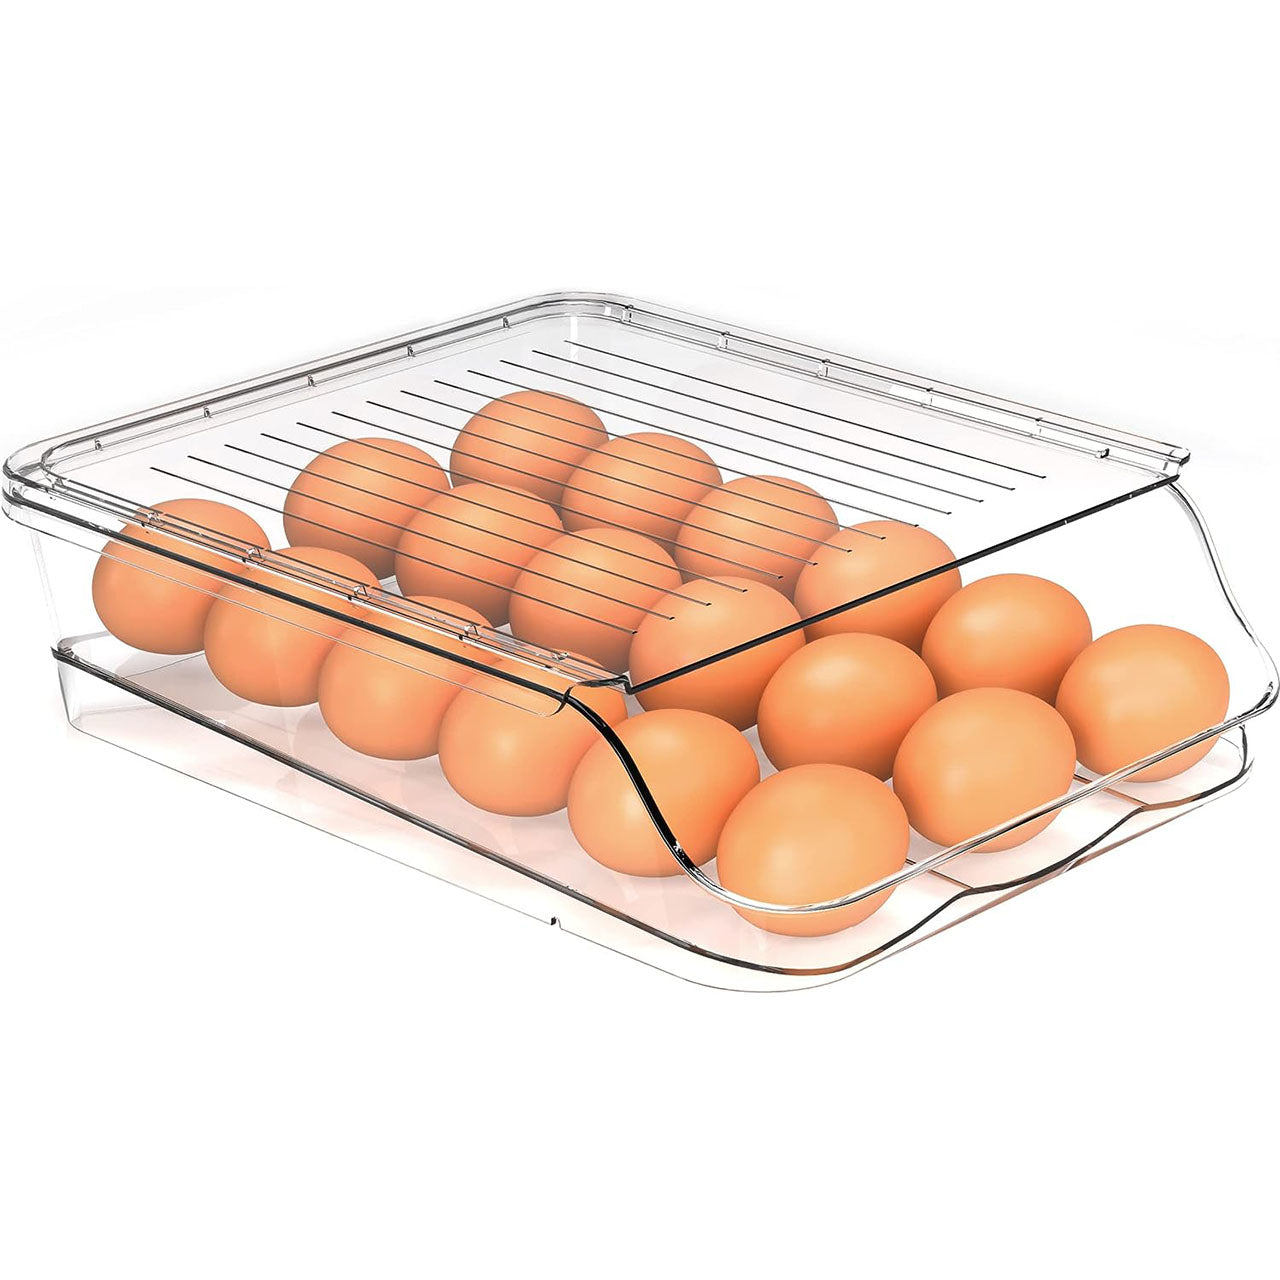 Rolling Egg Container for Refrigerator with Lid: Stackable Plastic Egg Holder Fast Forward